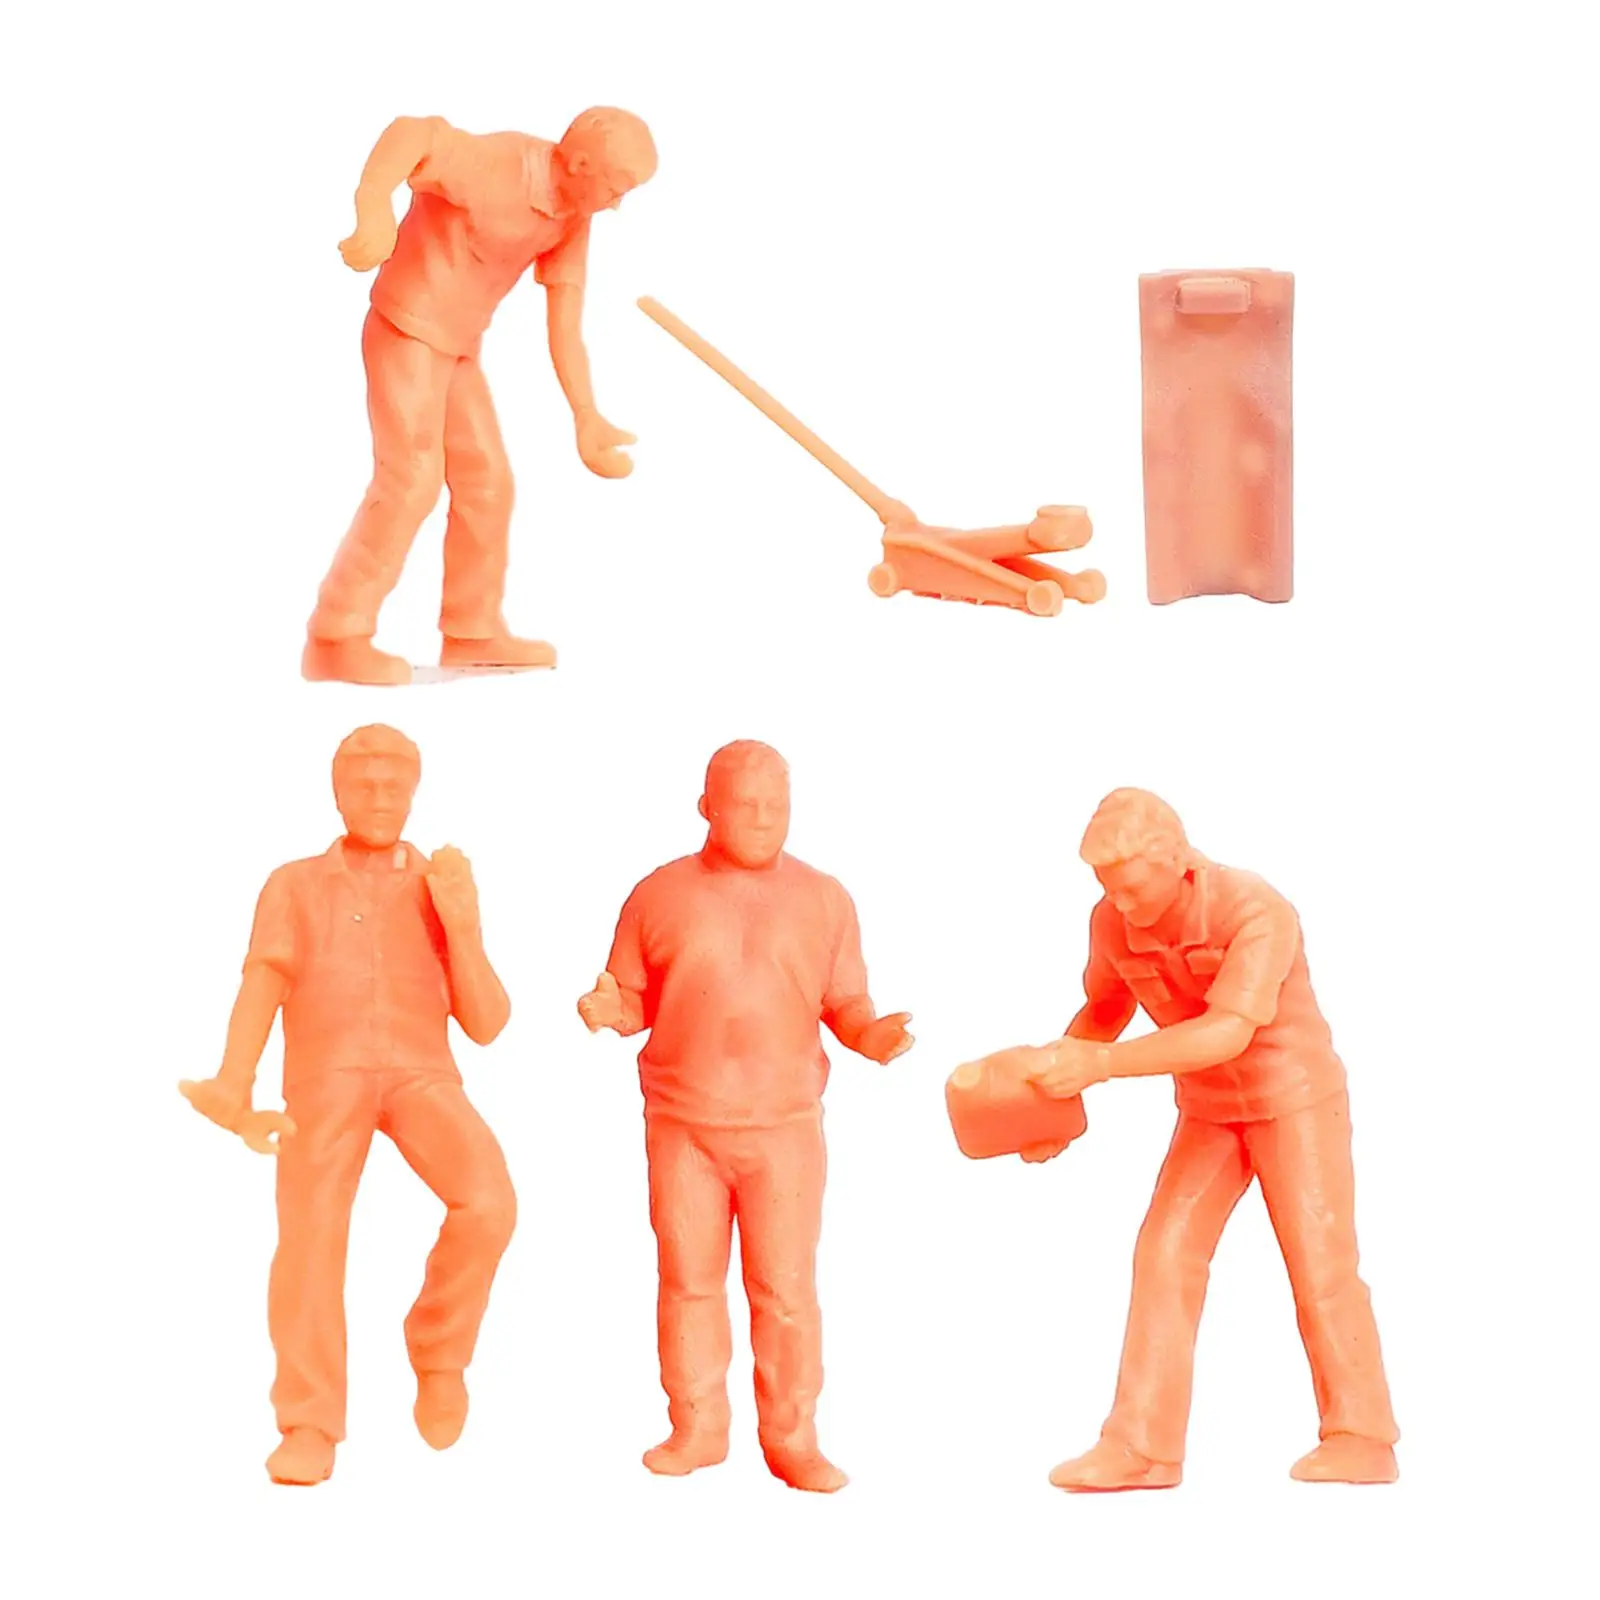 1/64 Scale Repairman Figure Role Play Resin Miniature Tiny People for Fairy Garden DIY Projects Railway Station Micro Landscape